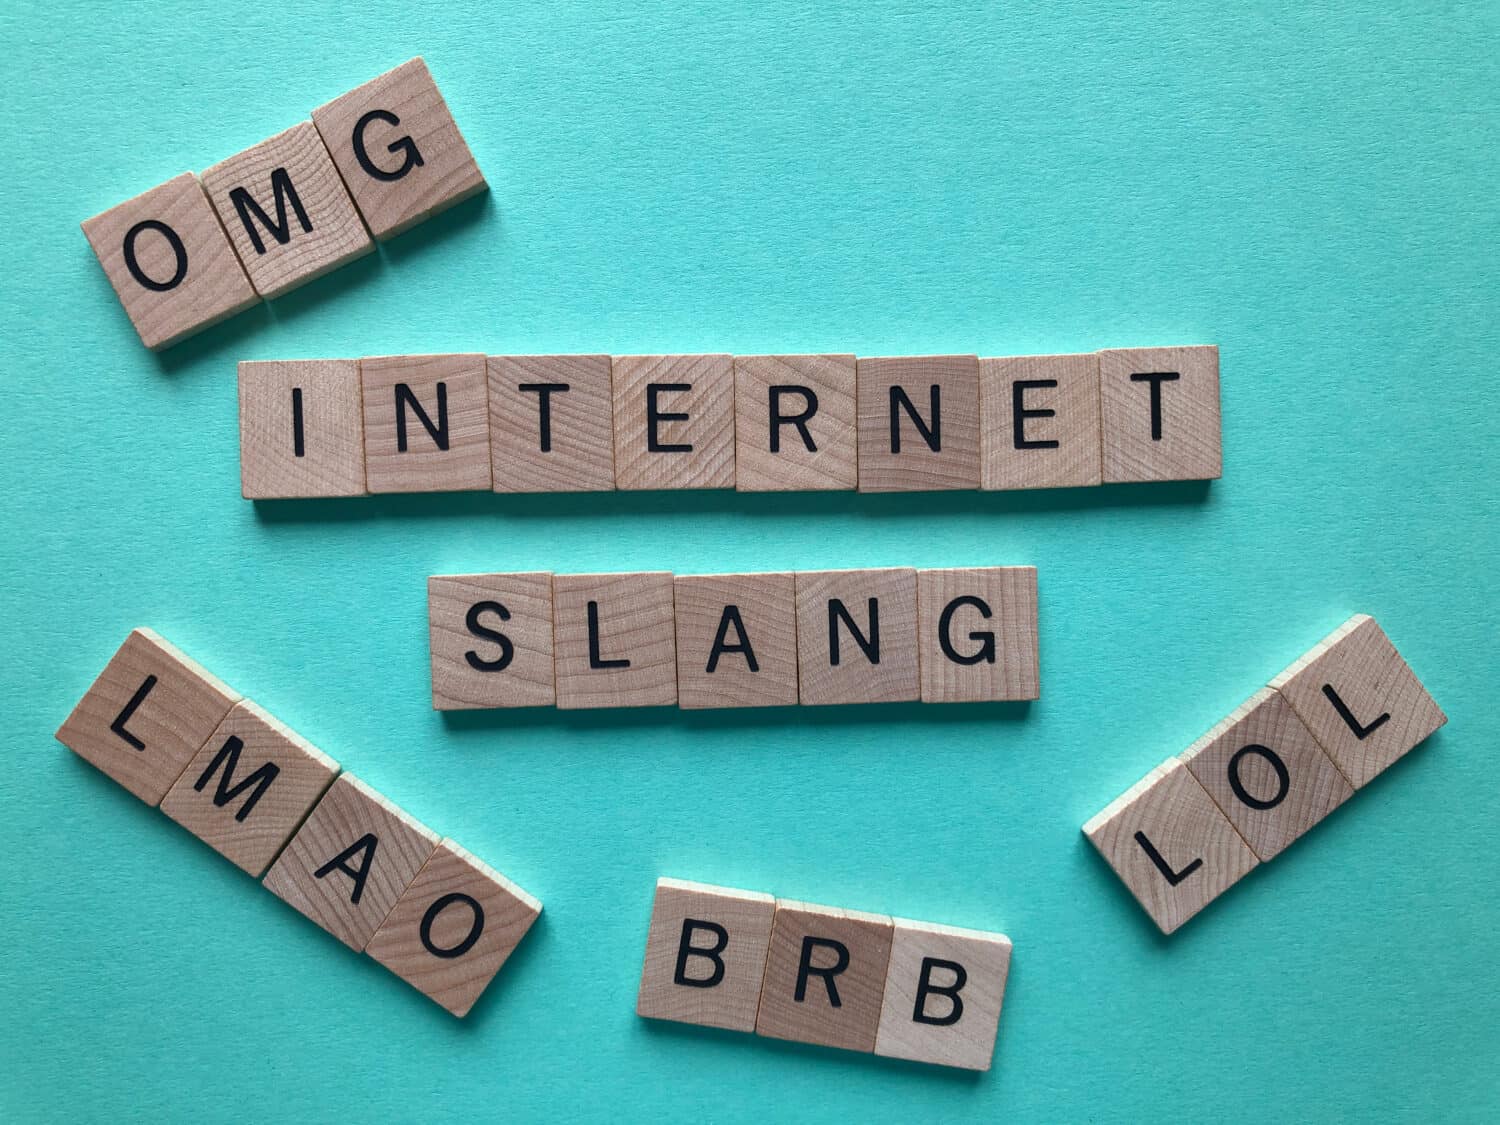 Internet slang. Acronyms : BRB (Be Right Back), LOL, OMG, and LMAO used as abbreviations in text messages, in wooden letters on a turquoise background with copy space.